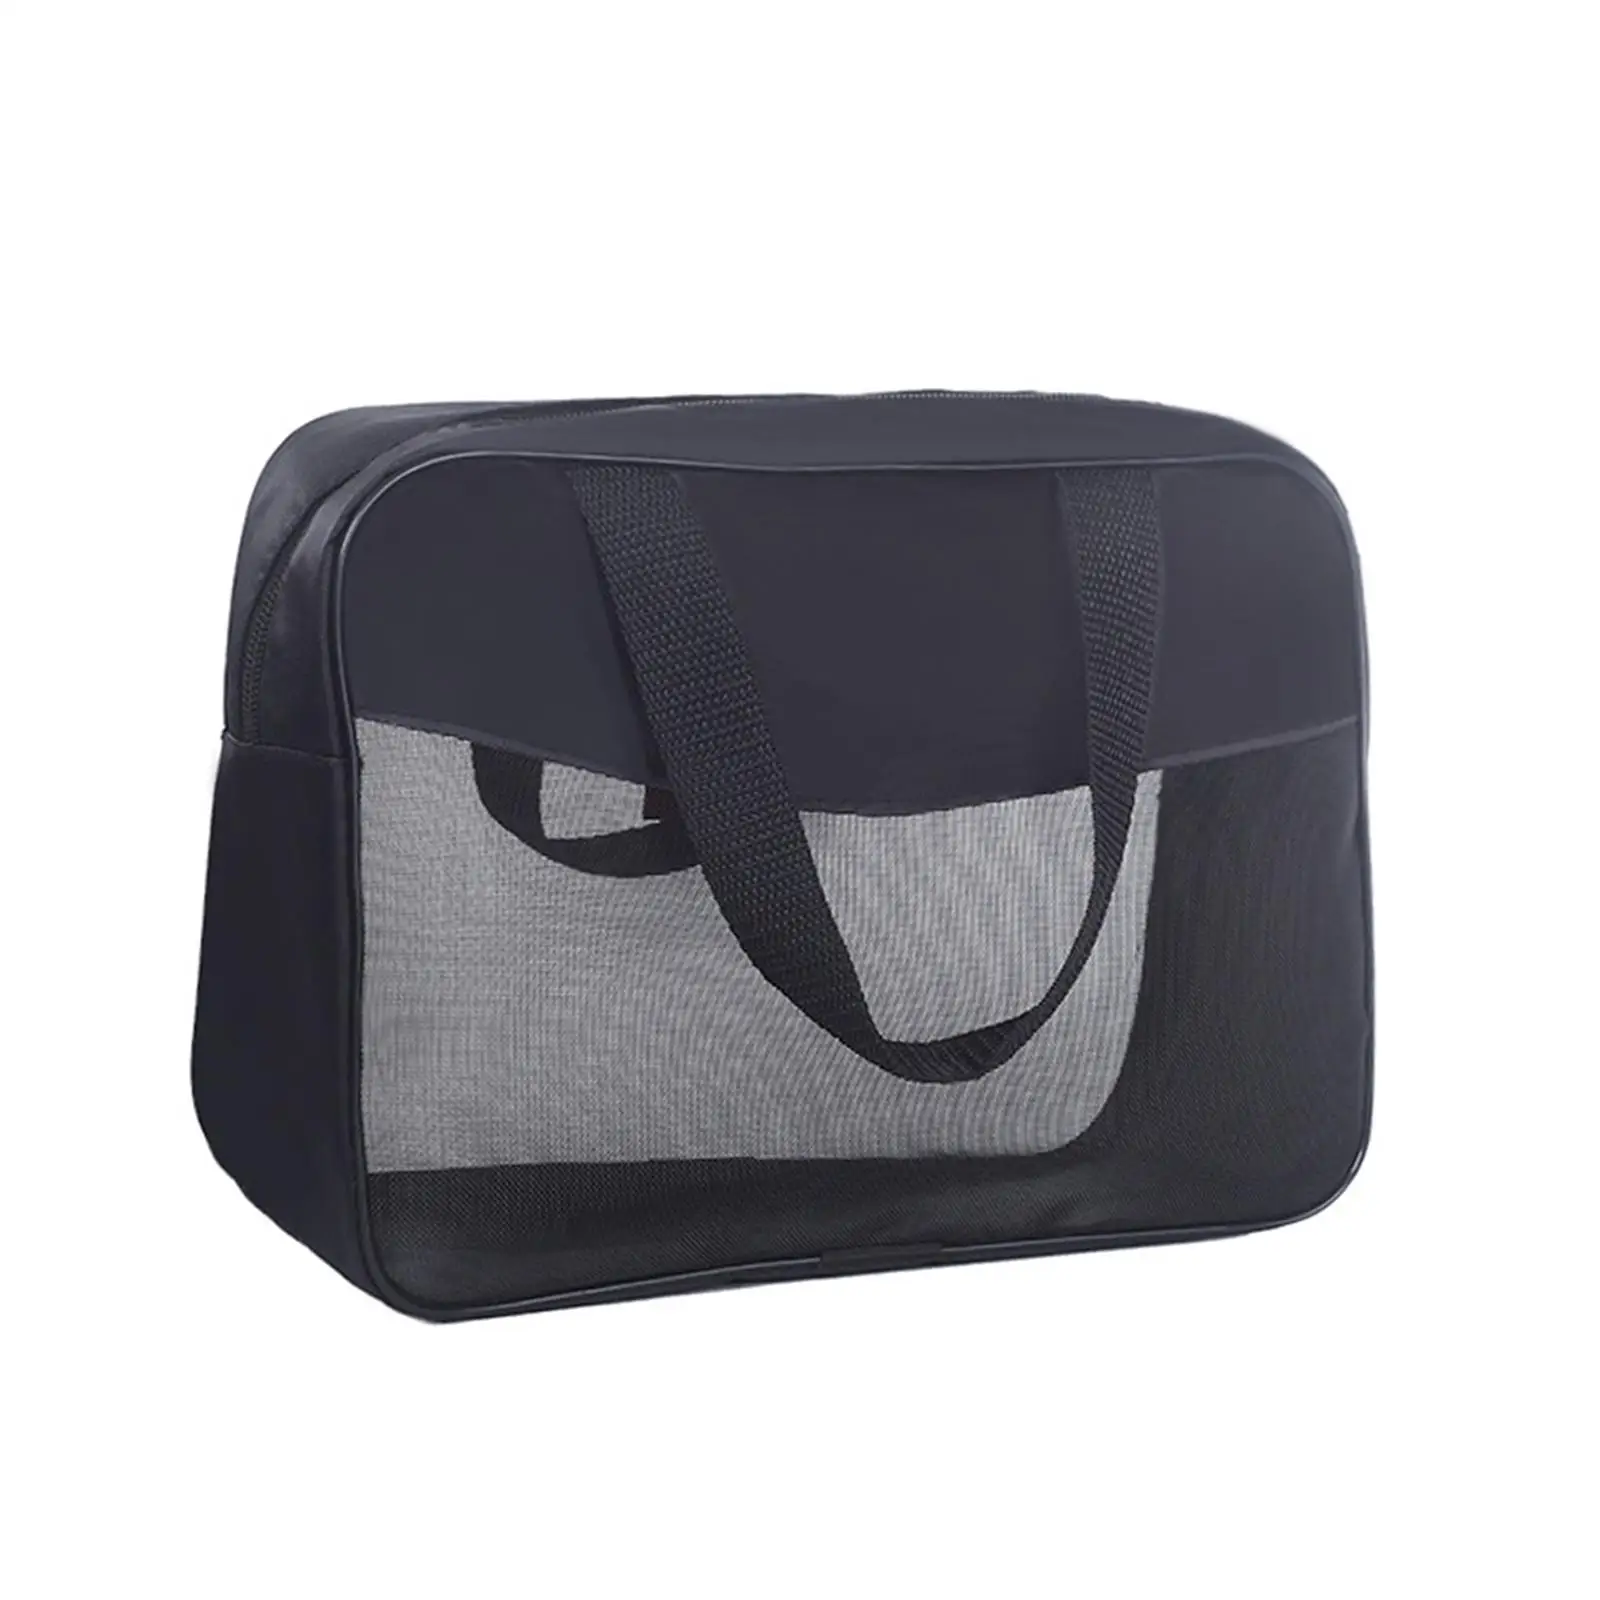 Travel Makeup Bag Mesh Handle Pouch Clear Cosmetic Organizer Large Capacity for Bathroom Cosmetics Toiletries Business Traveling